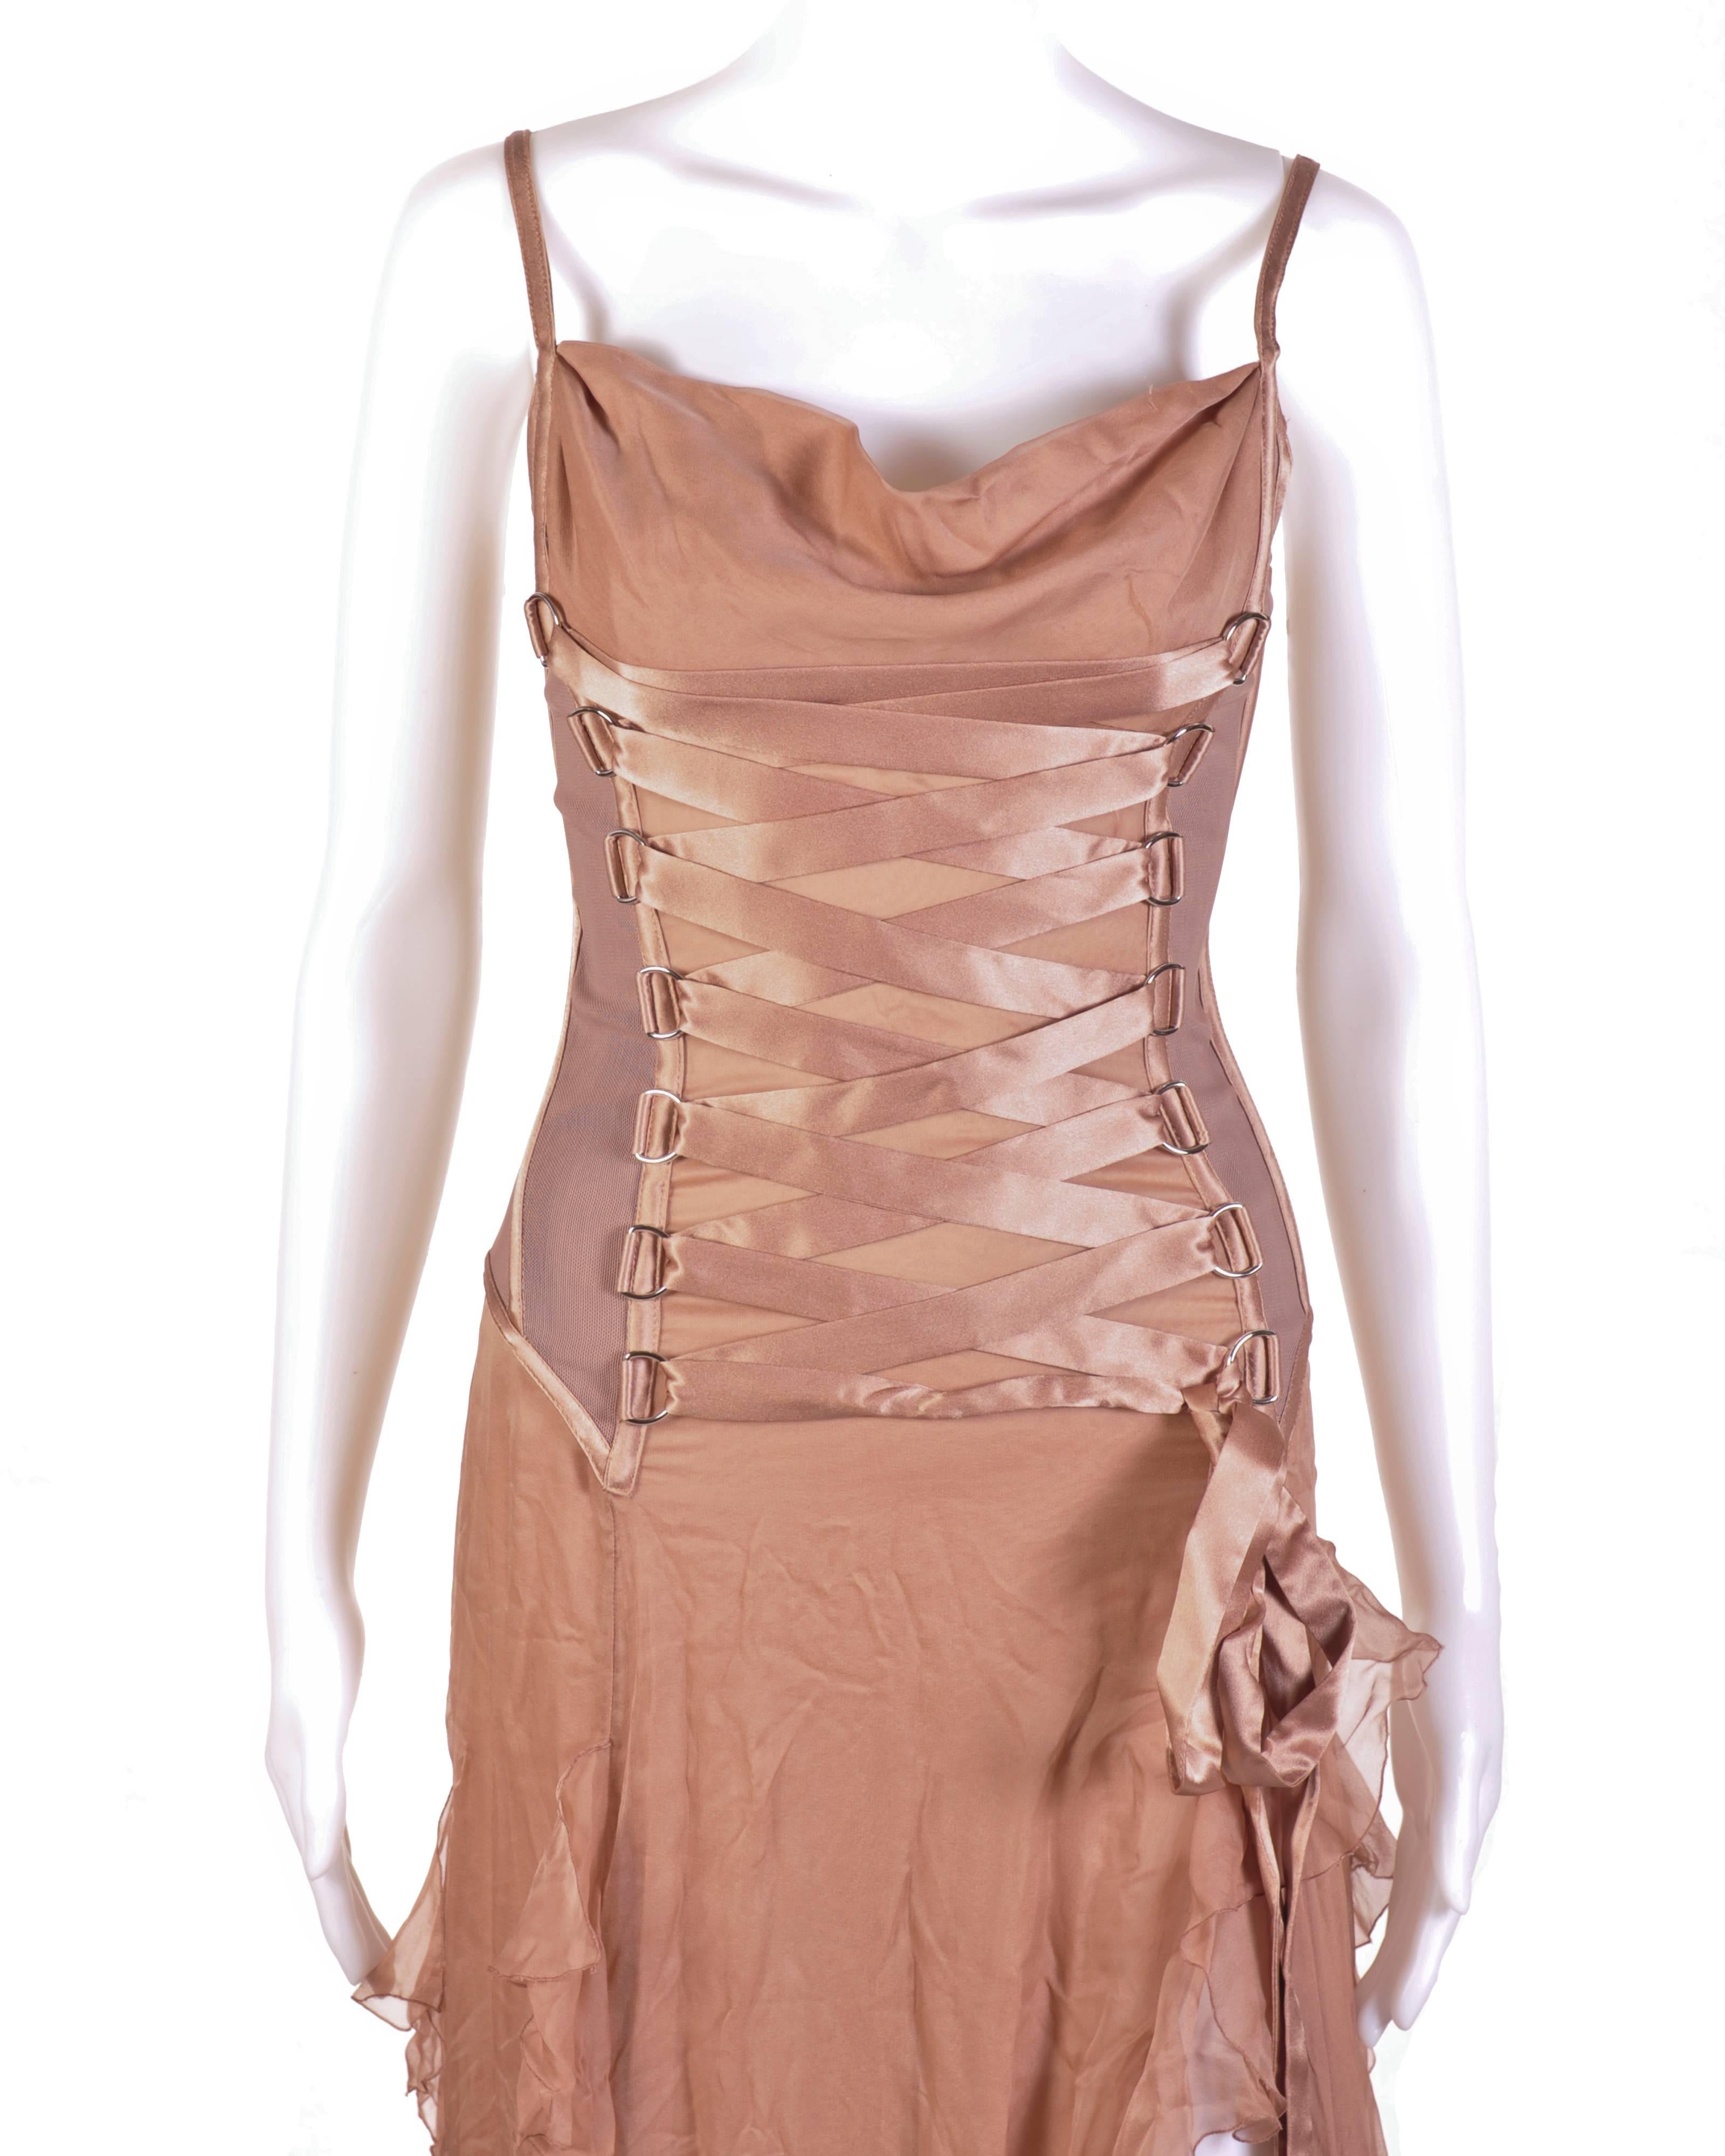 VERSACE Nude Corset Long Dress

Look every bit the fairy tale princess in this
romantic Versace gown. This spaghetti strapped
dress is fashioned with nude, silk chiffon and a
corset-styled bust. The corset is medium weight,
fully lined, boned at the